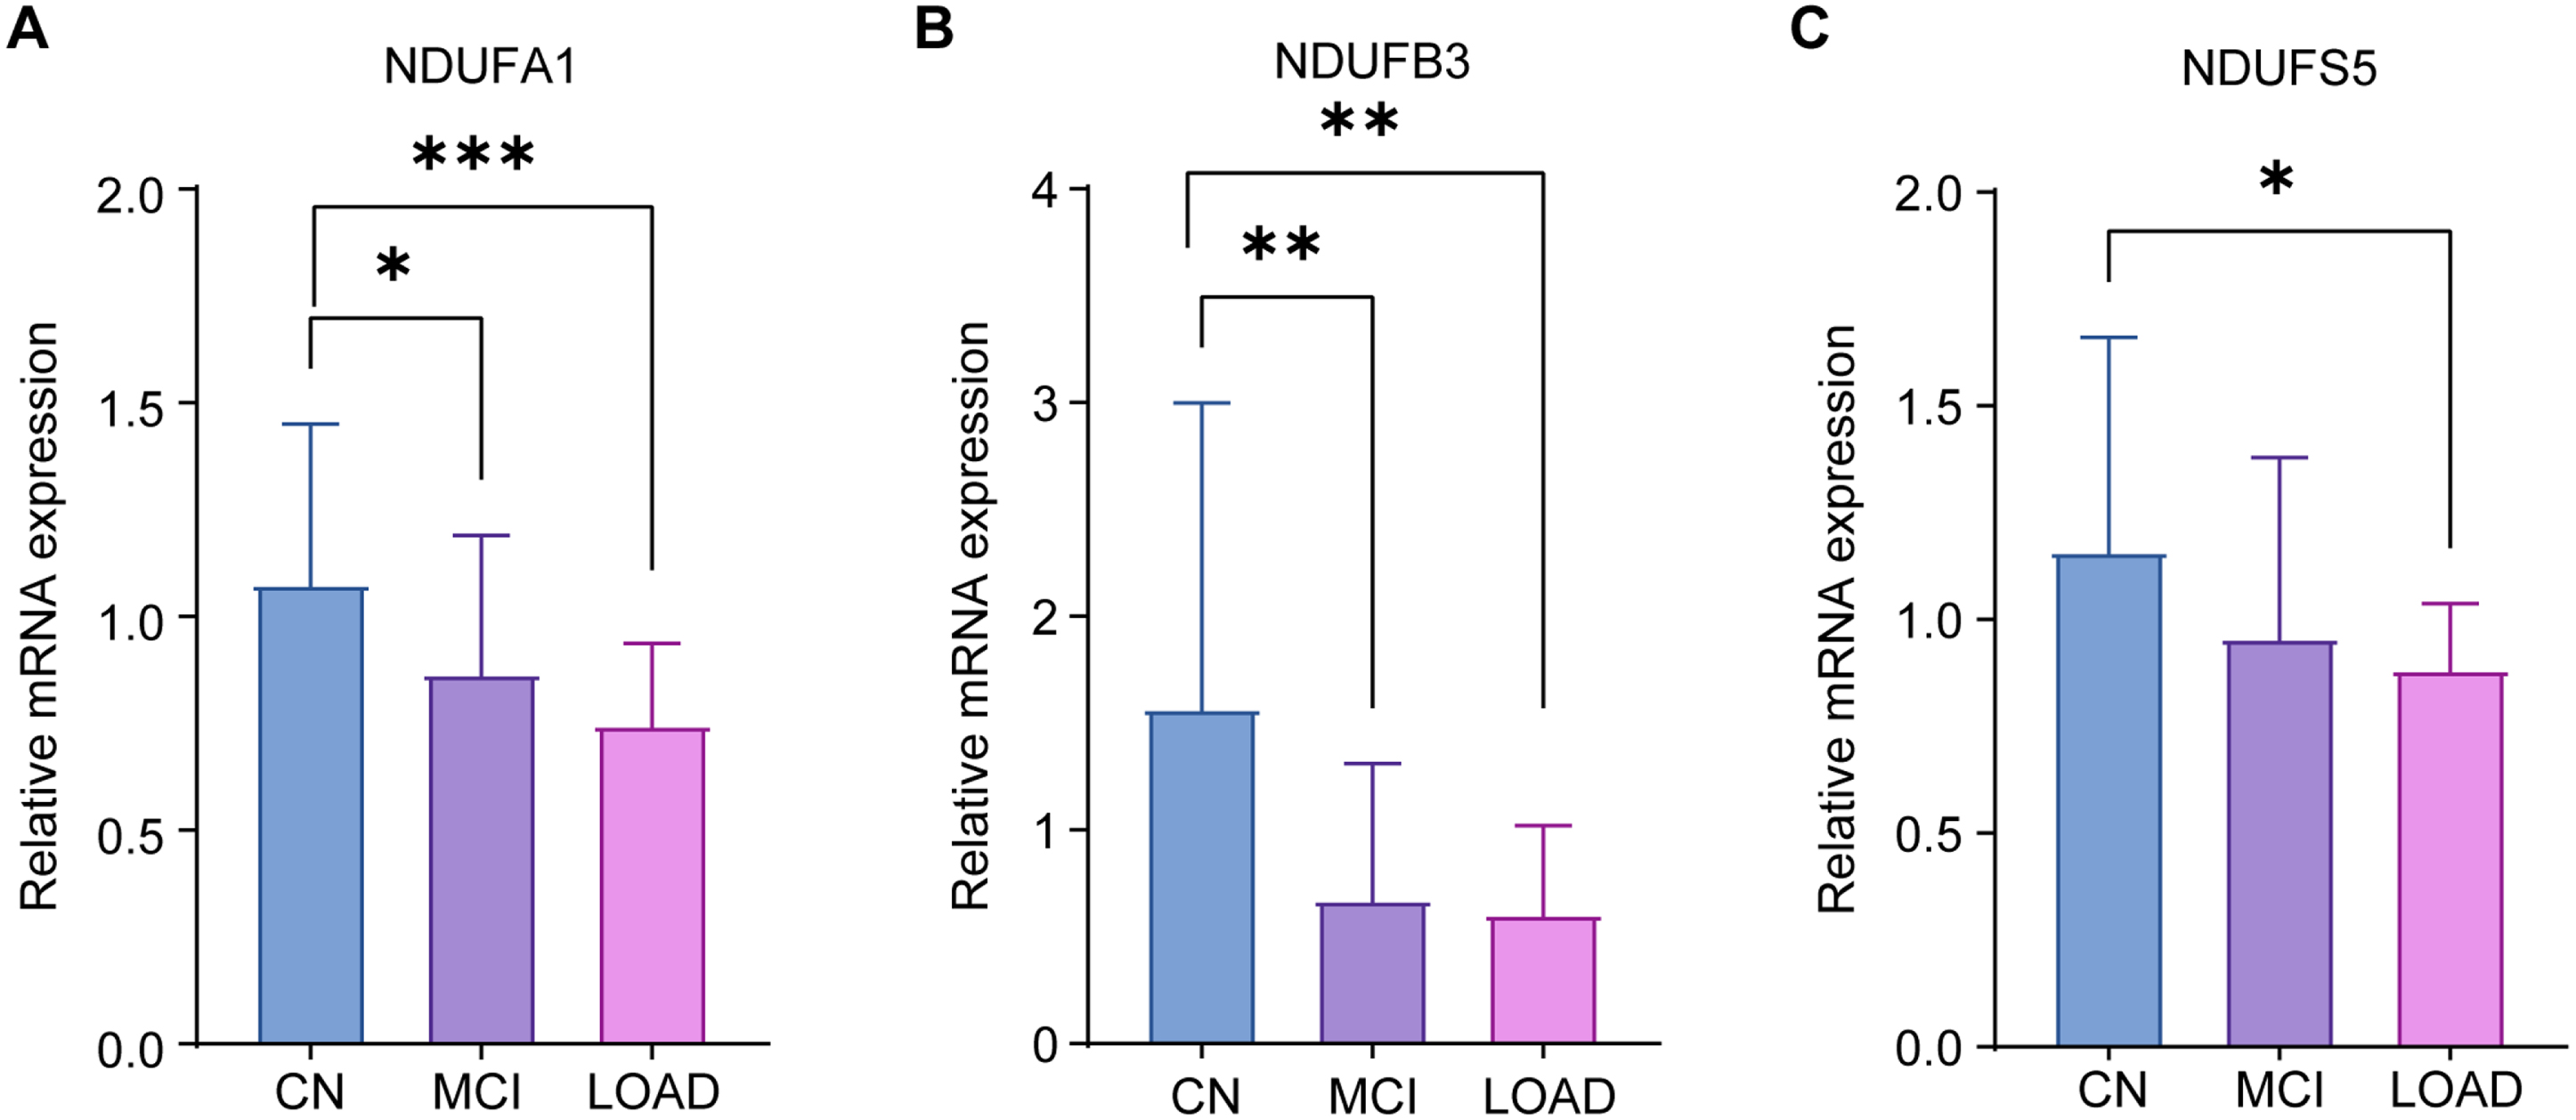 qRT-PCR validation results. qRT-PCR was used to verify the expression of NDUFA1 (A), NDUFB3 (B), and NDUFS5 (C) in CN, LOAD, and MCI. The experiments were performed in triplicate, and the data were expressed as mean±SEM (*p <  0.05, **p <  0.01, ***p <  0.001; ns, no significance).